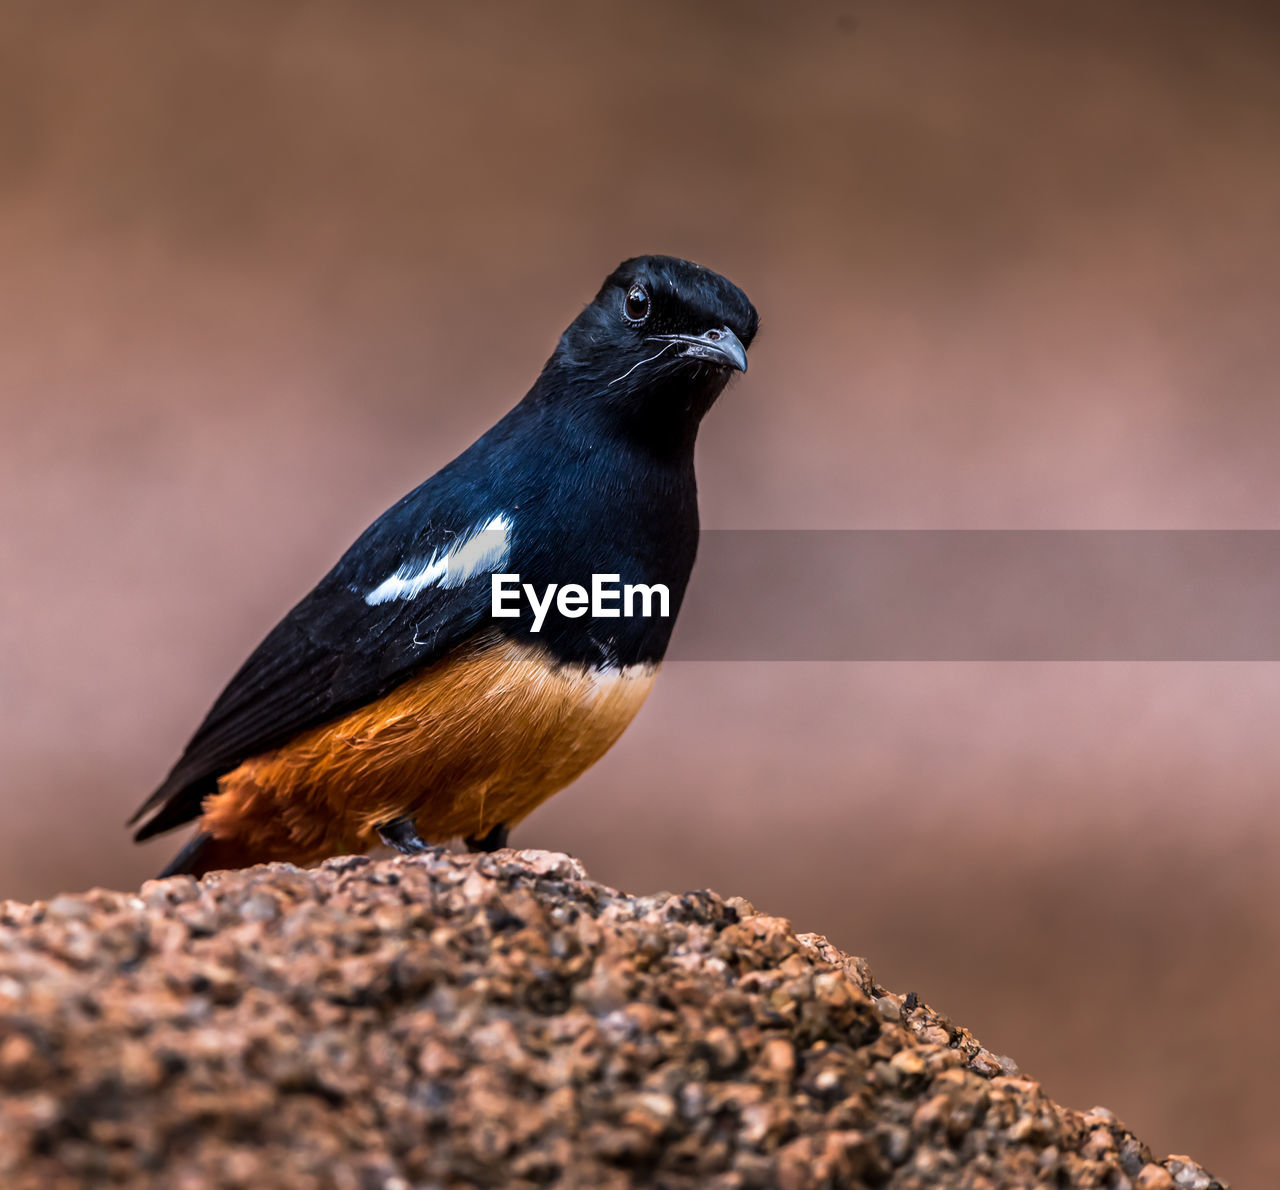 animal themes, animal, bird, animal wildlife, wildlife, one animal, close-up, beak, nature, no people, songbird, black, full length, rock, side view, outdoors, perching, selective focus, day, multi colored, beauty in nature, copy space, focus on foreground, portrait, surface level